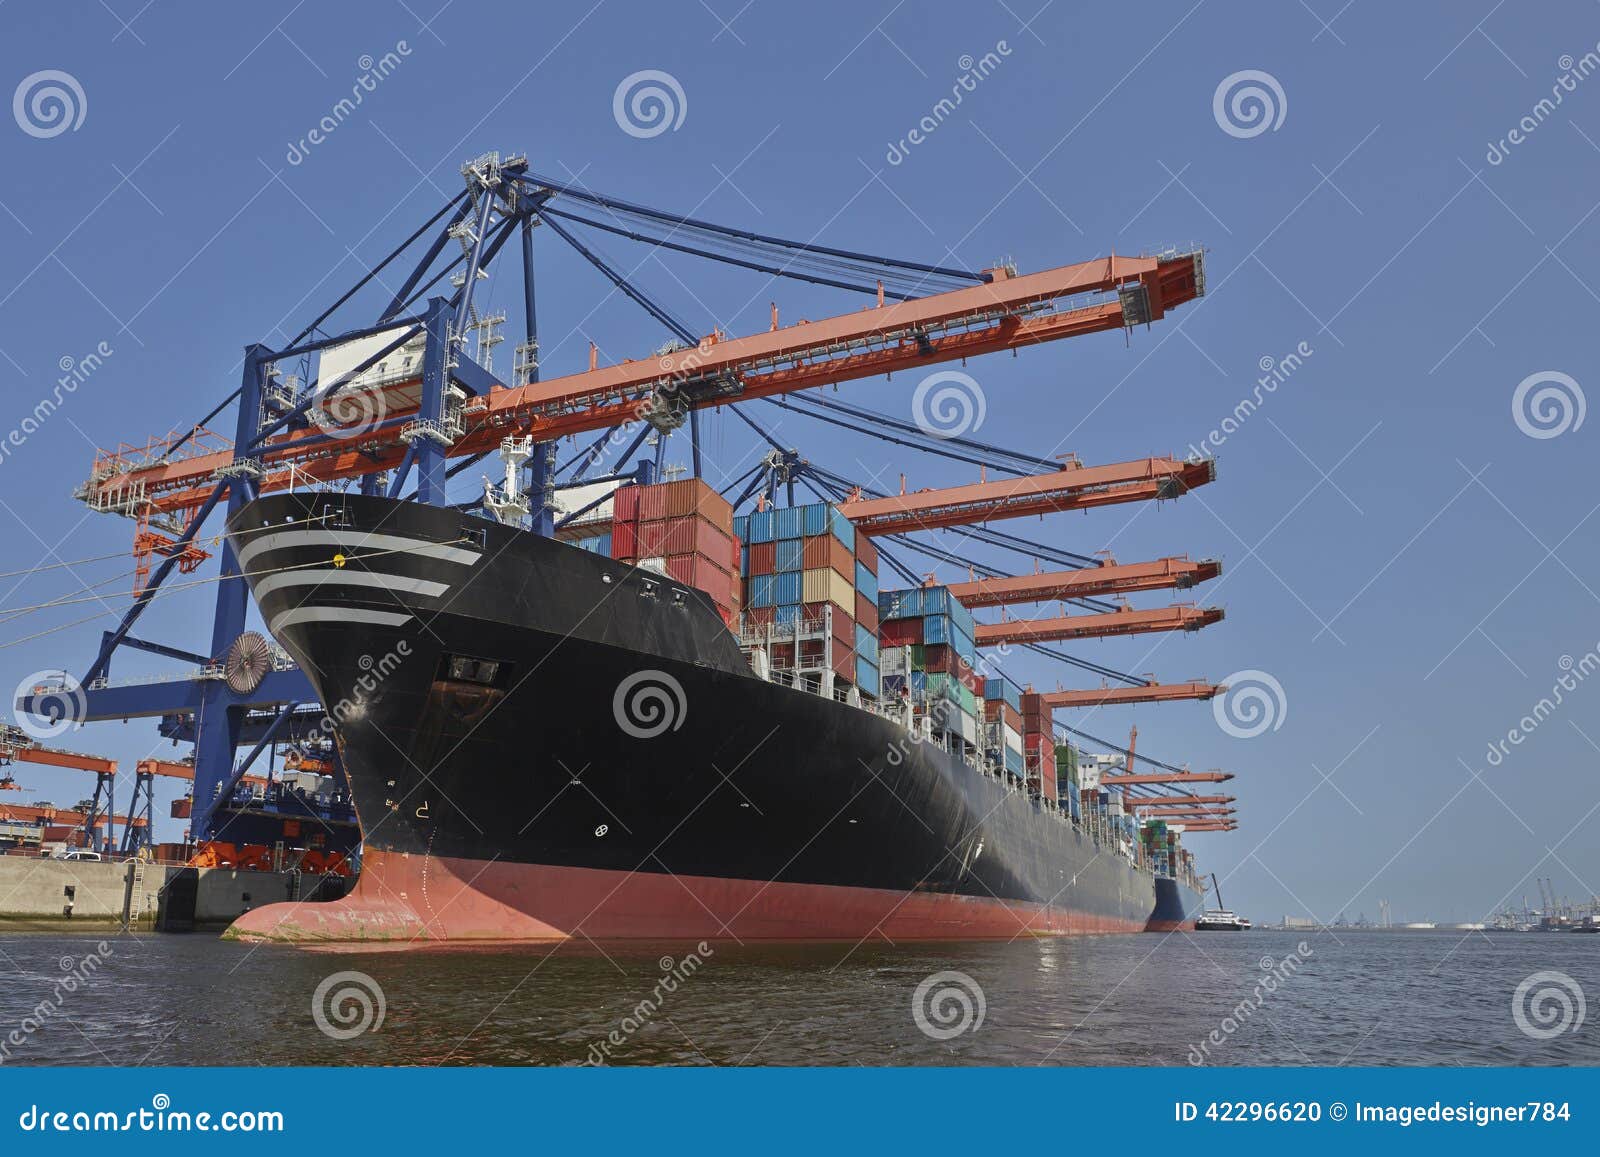 rotterdam port container ship